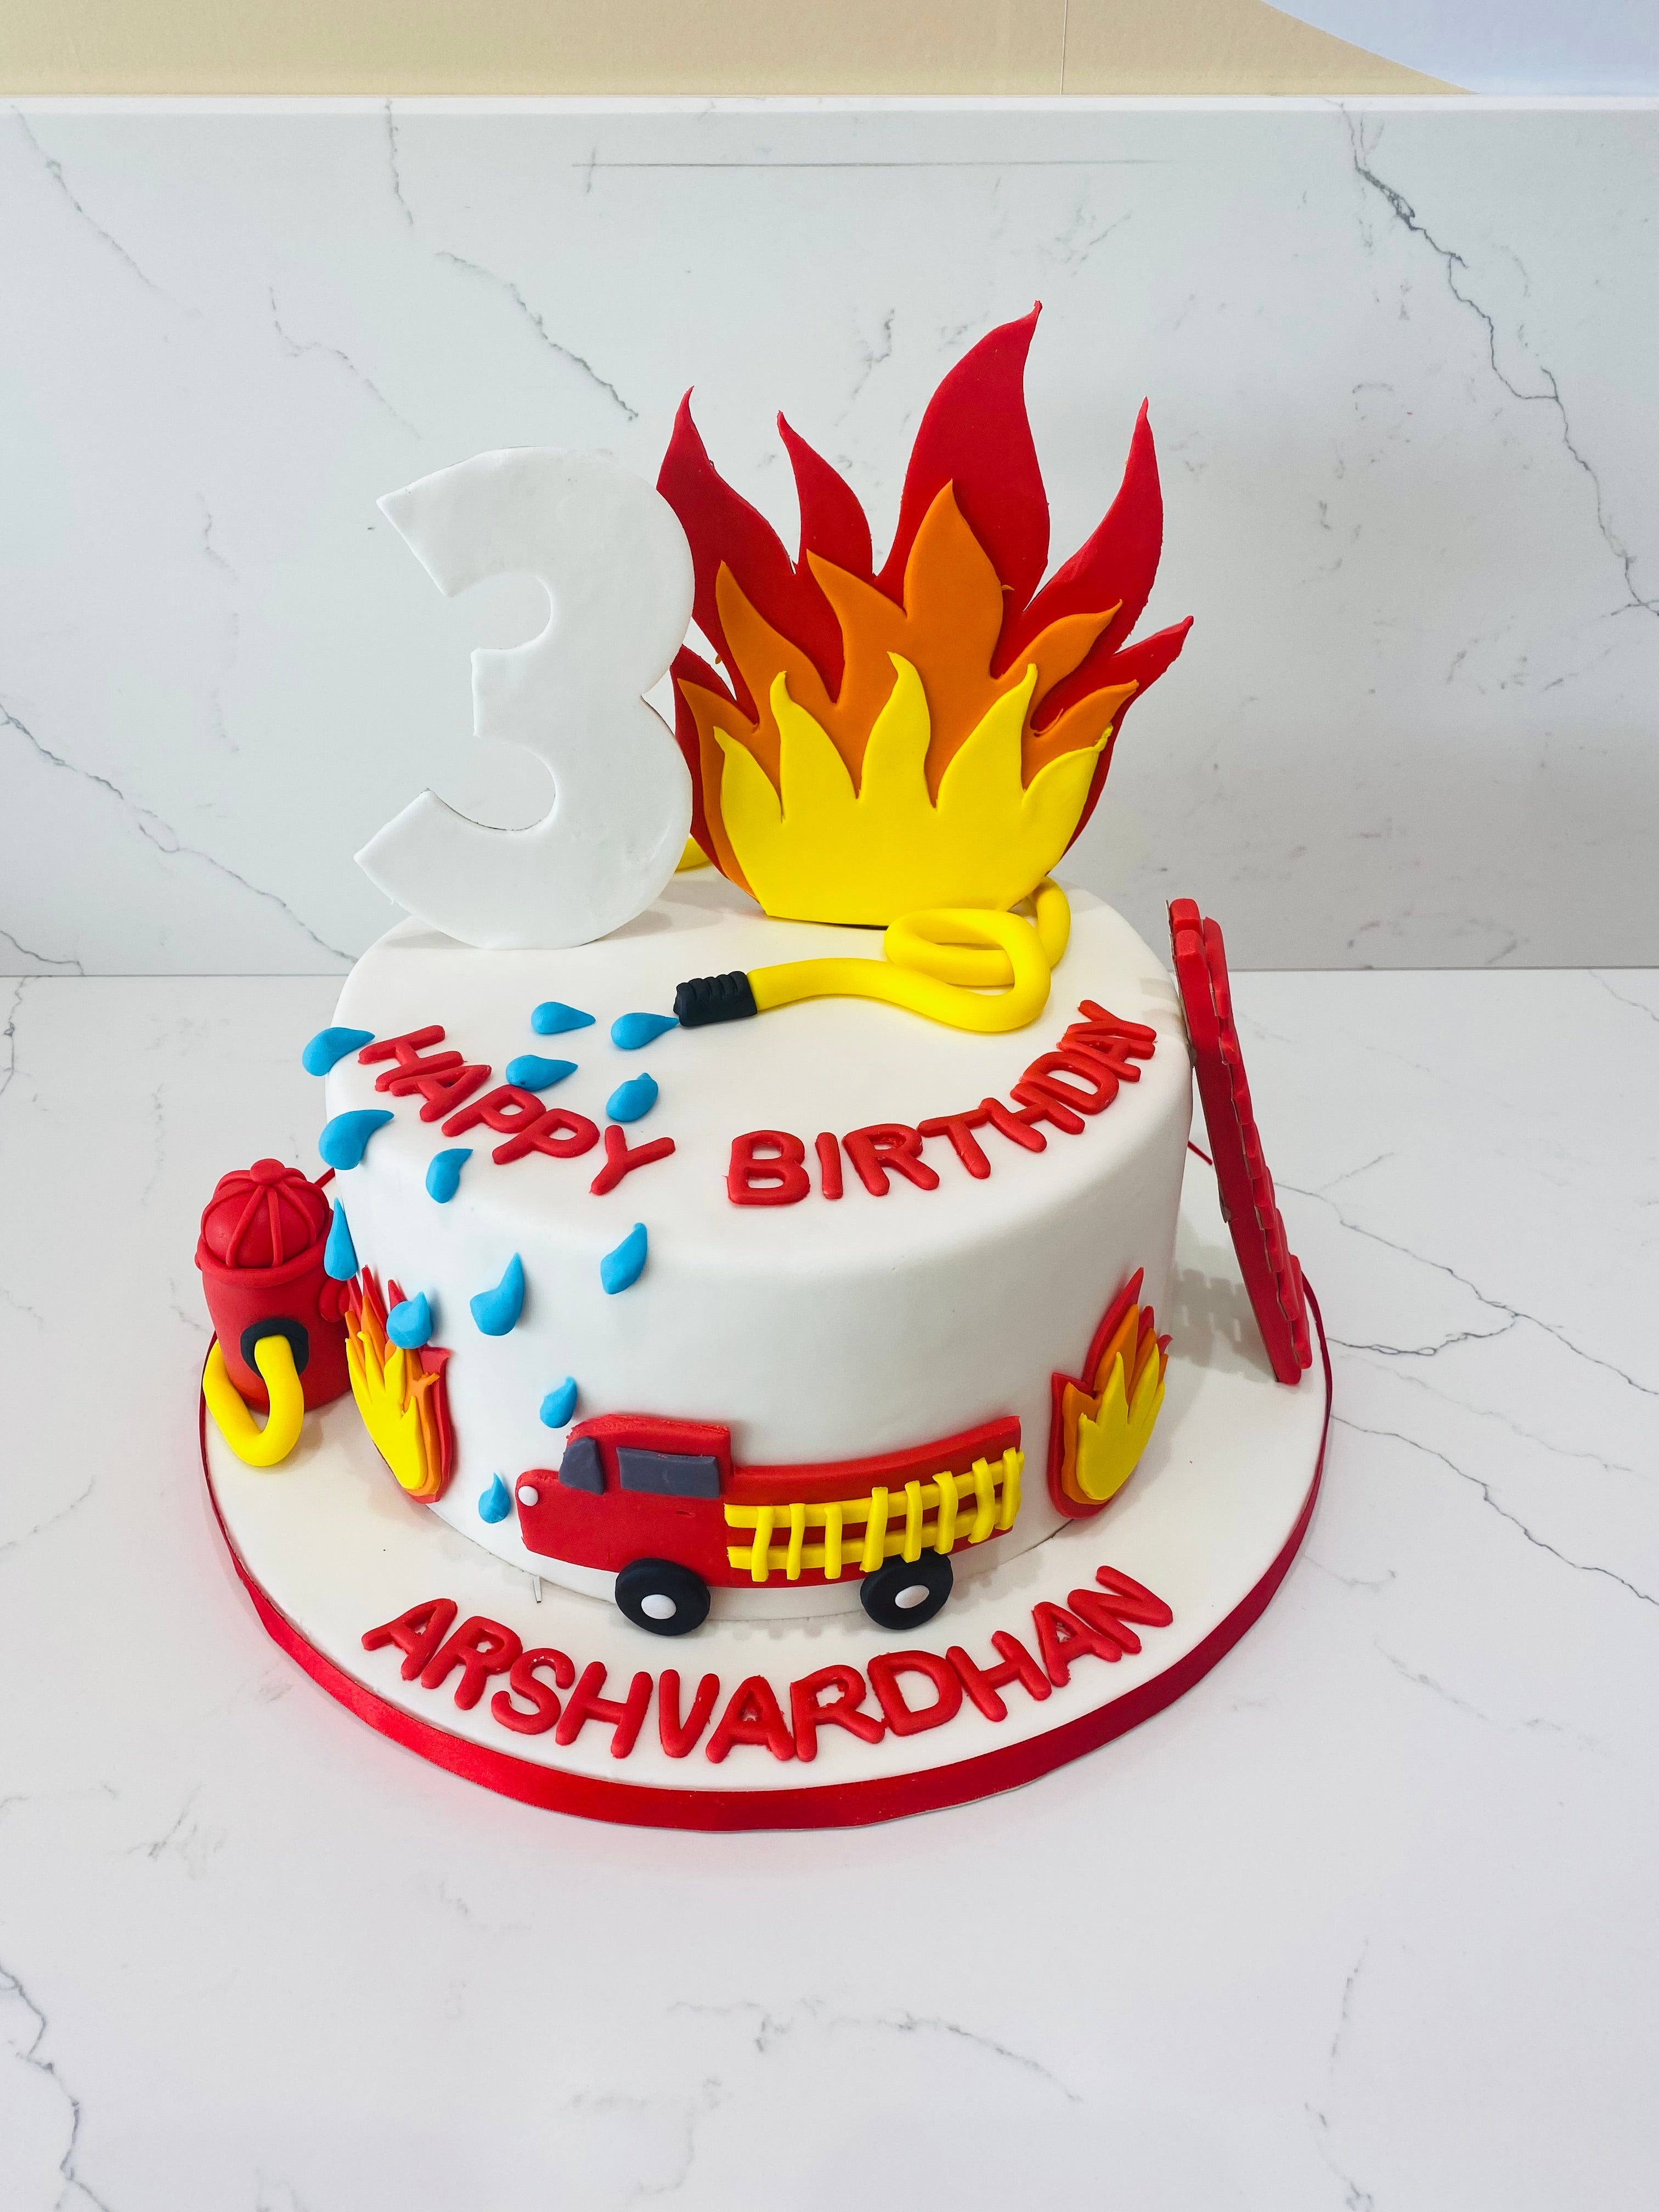 Dumpster Fire Layer Cake - Classy Girl Cupcakes